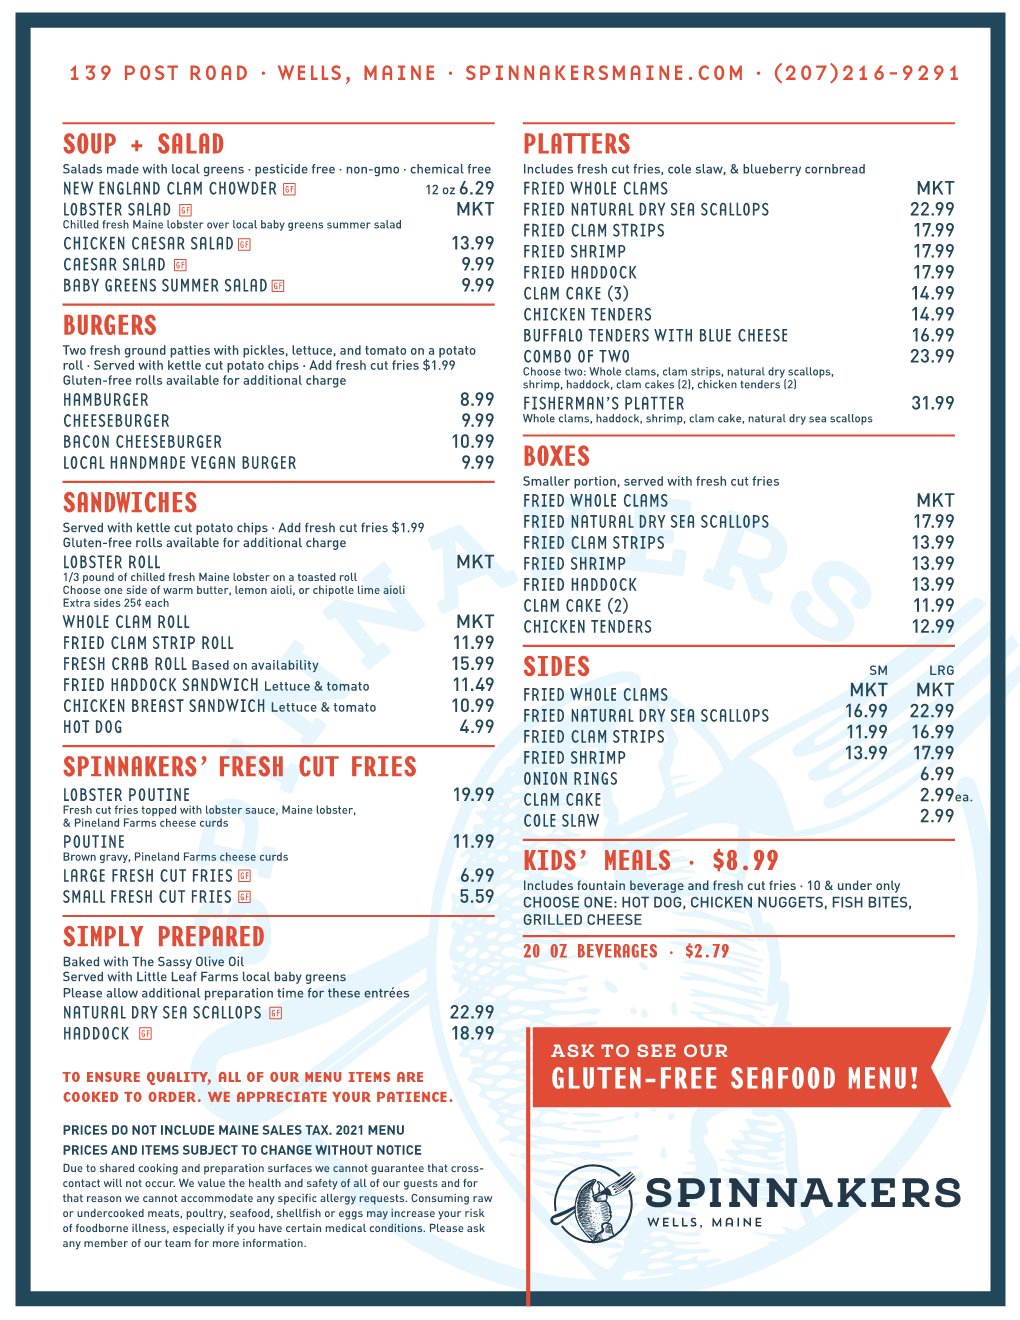 Gluten-Free Seafood Menu! Cooked to Order